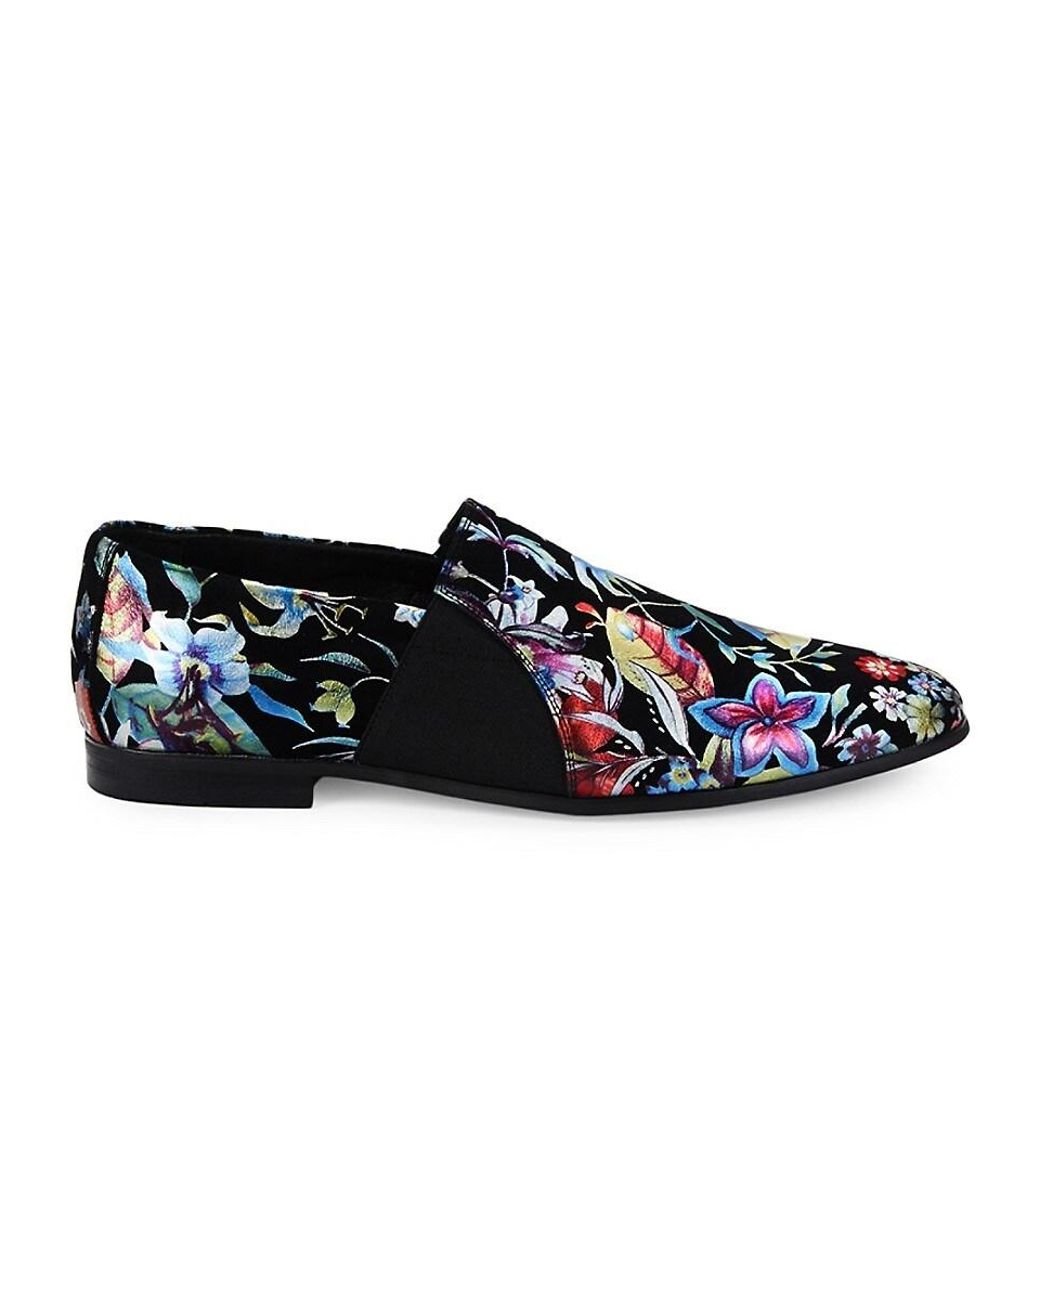 Robert Graham Artic Floral Leather Smoking Slippers in Black for Men | Lyst